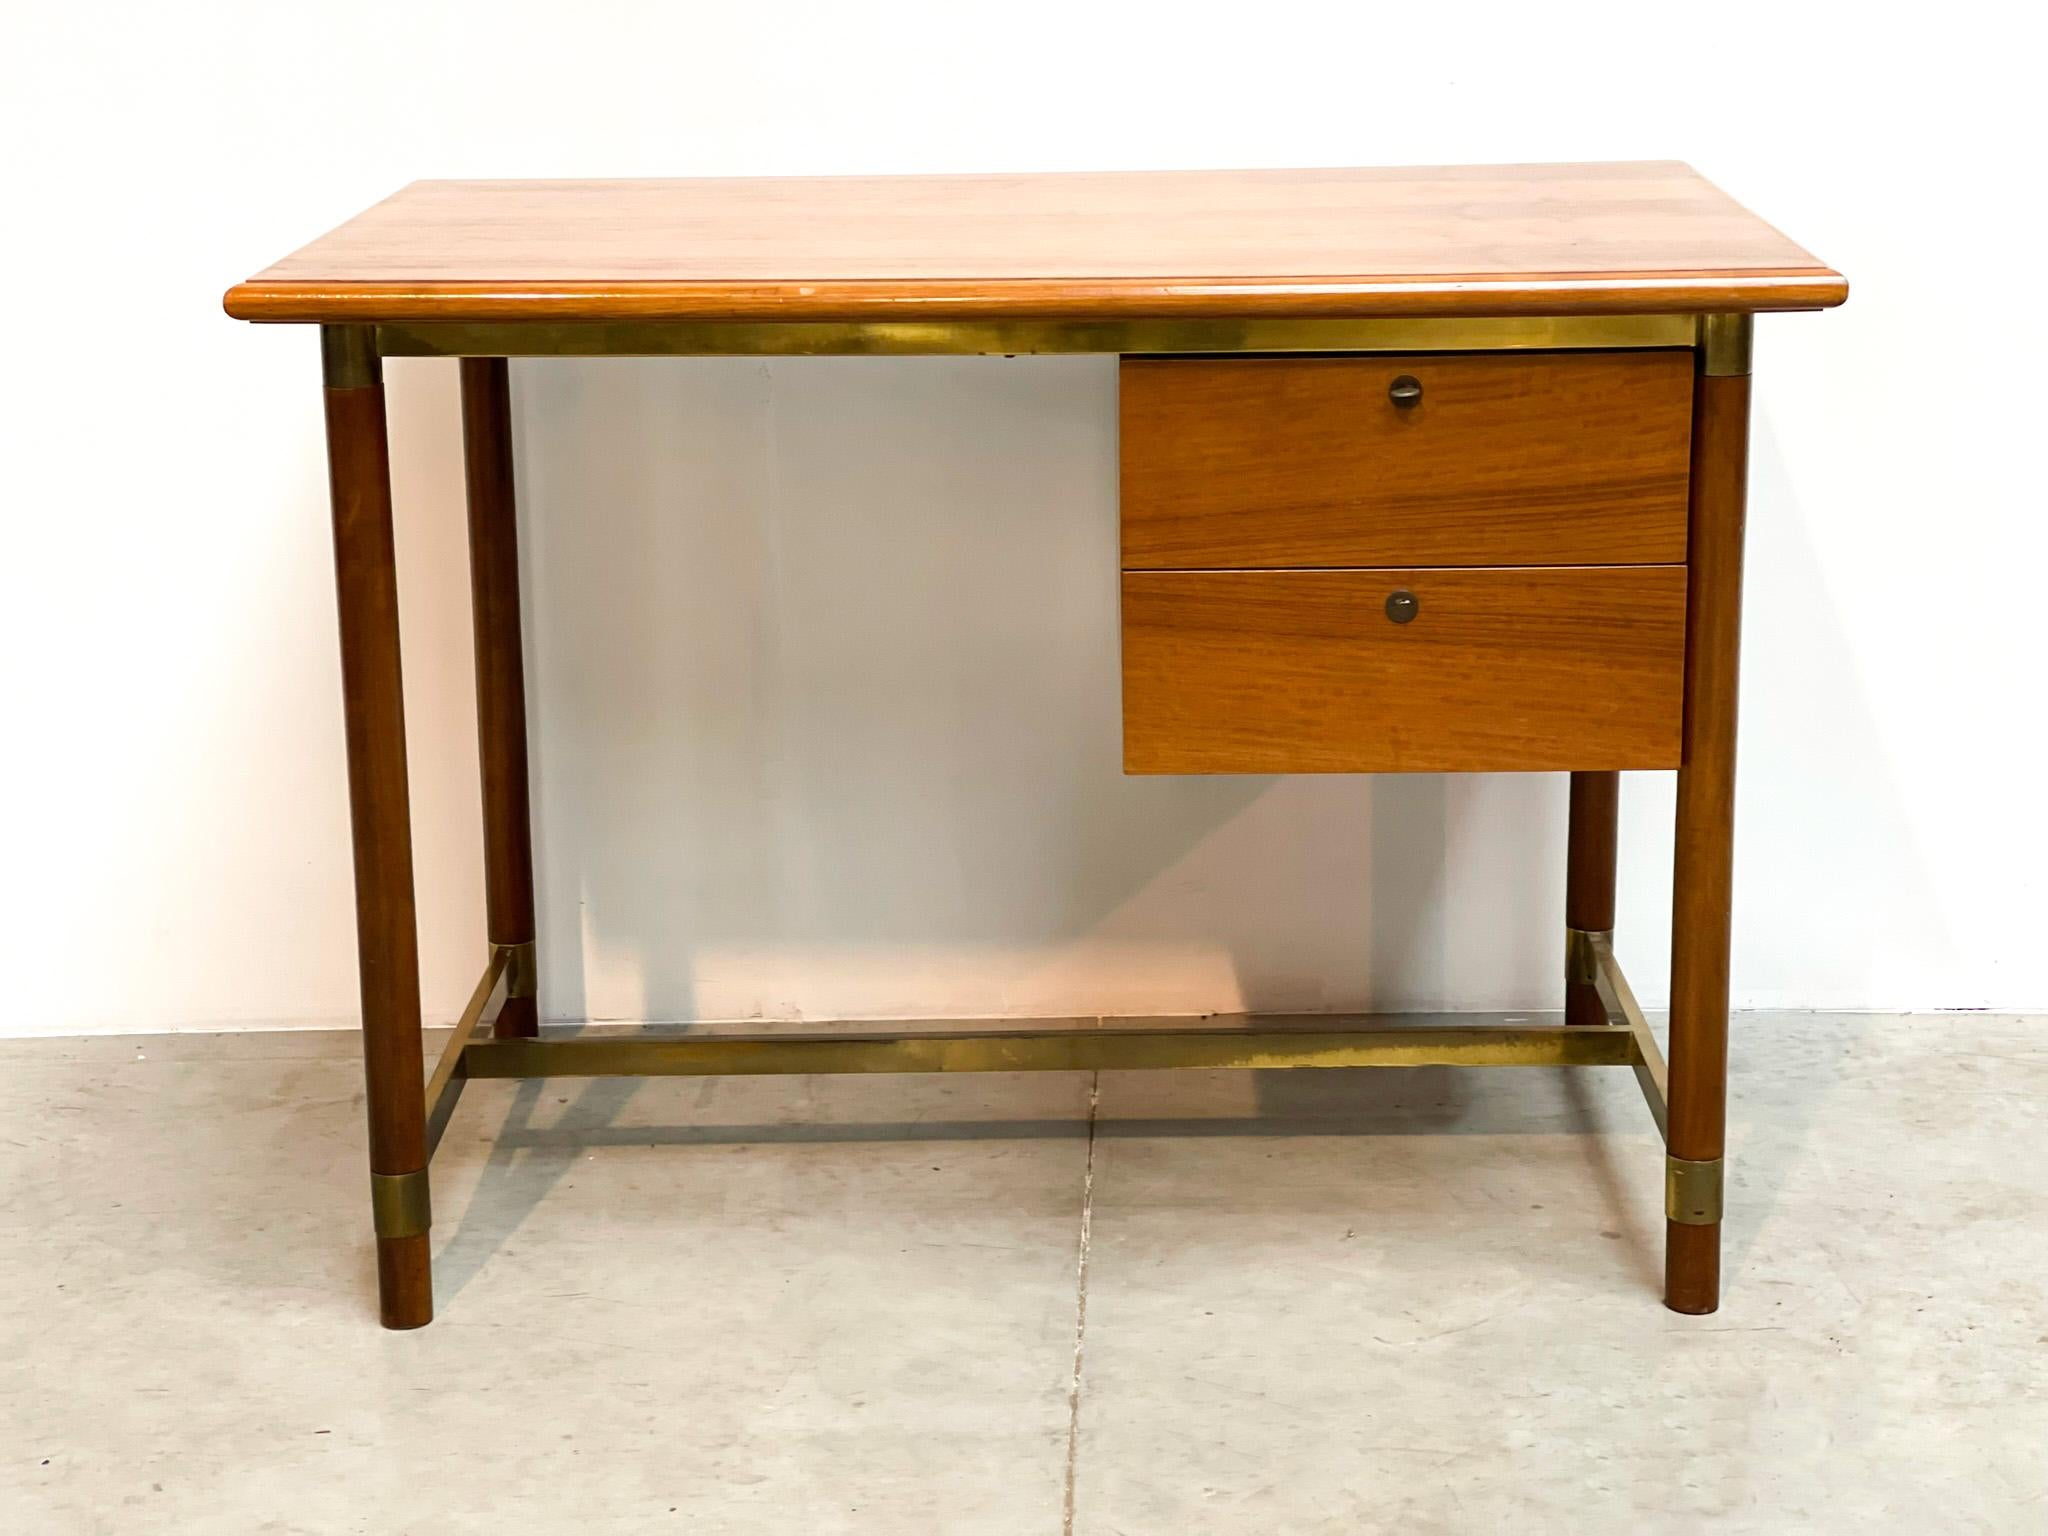 Brass & oak Italian desk
Very nice and compact desk from the 70's. This desk was made by an unknown italian maker. but it is a very nice piece of craftsmanship. This is a perfect example of top Italian craftsmanship. 
It has a beautiful oak frame